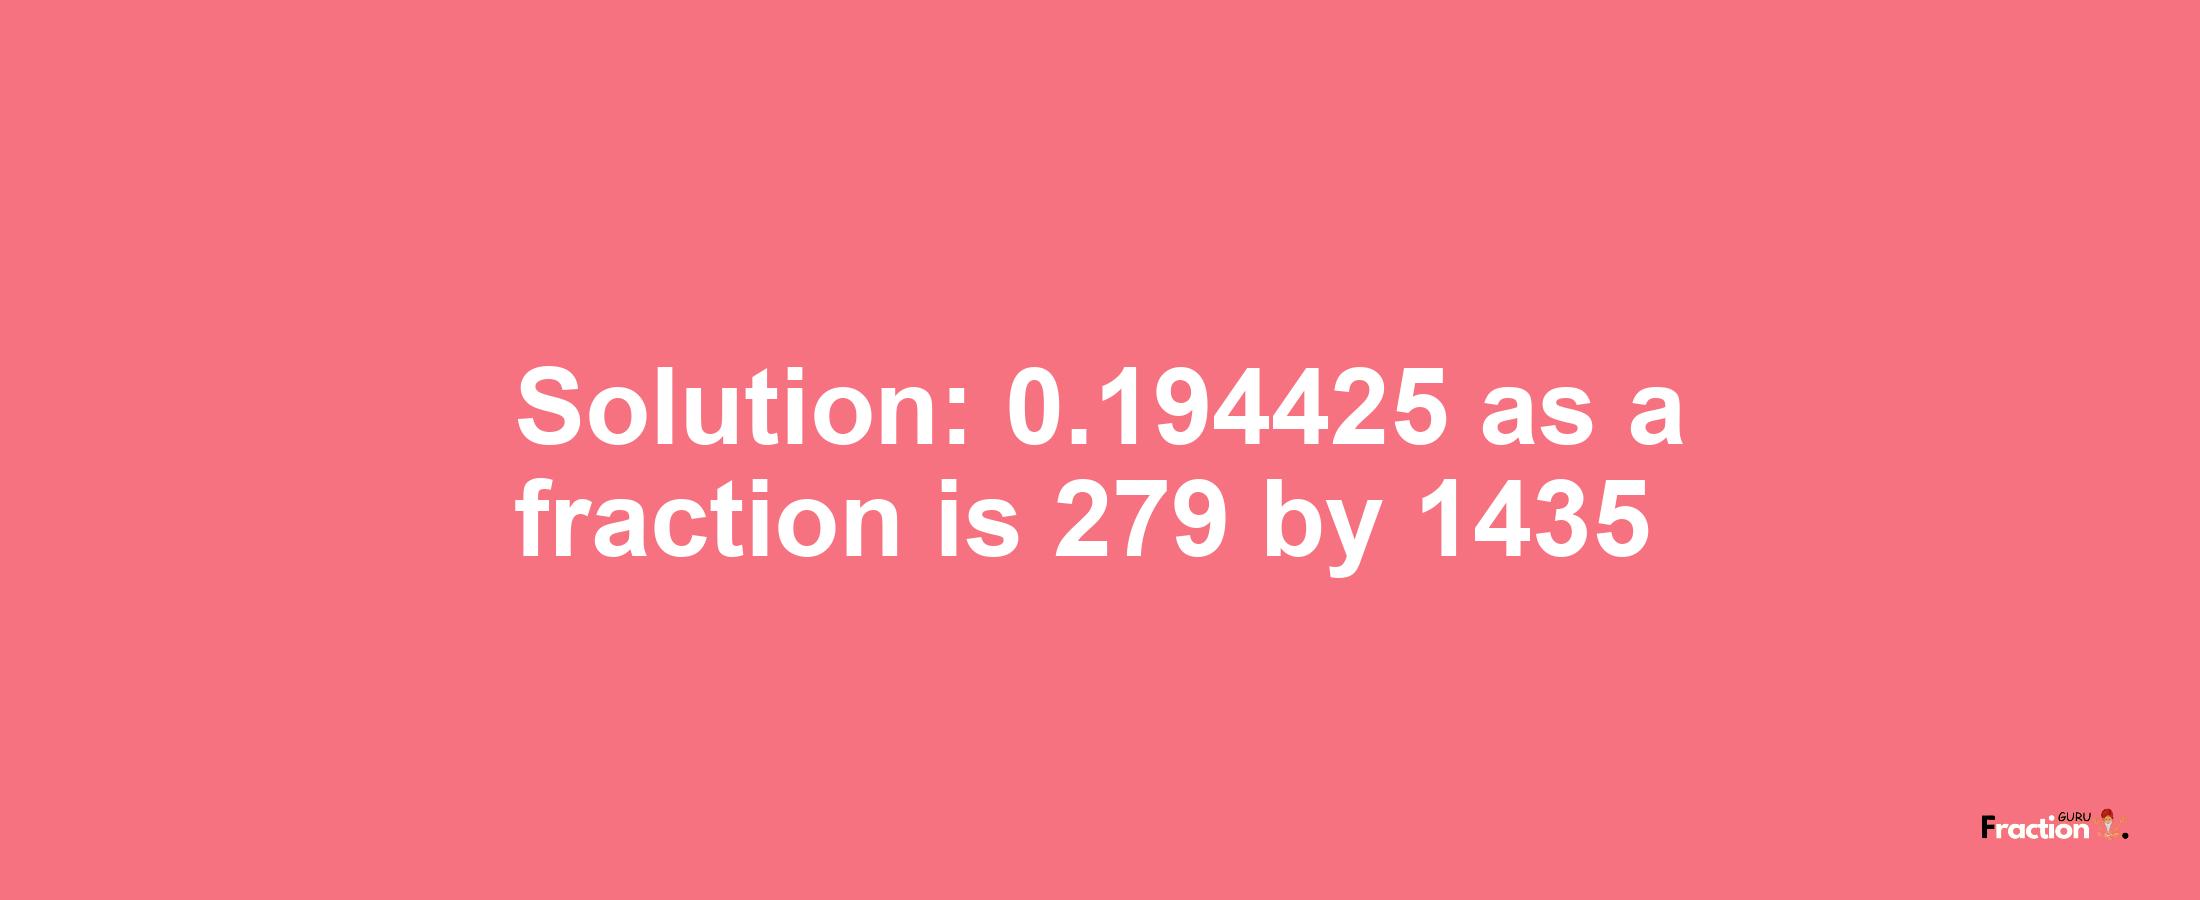 Solution:0.194425 as a fraction is 279/1435